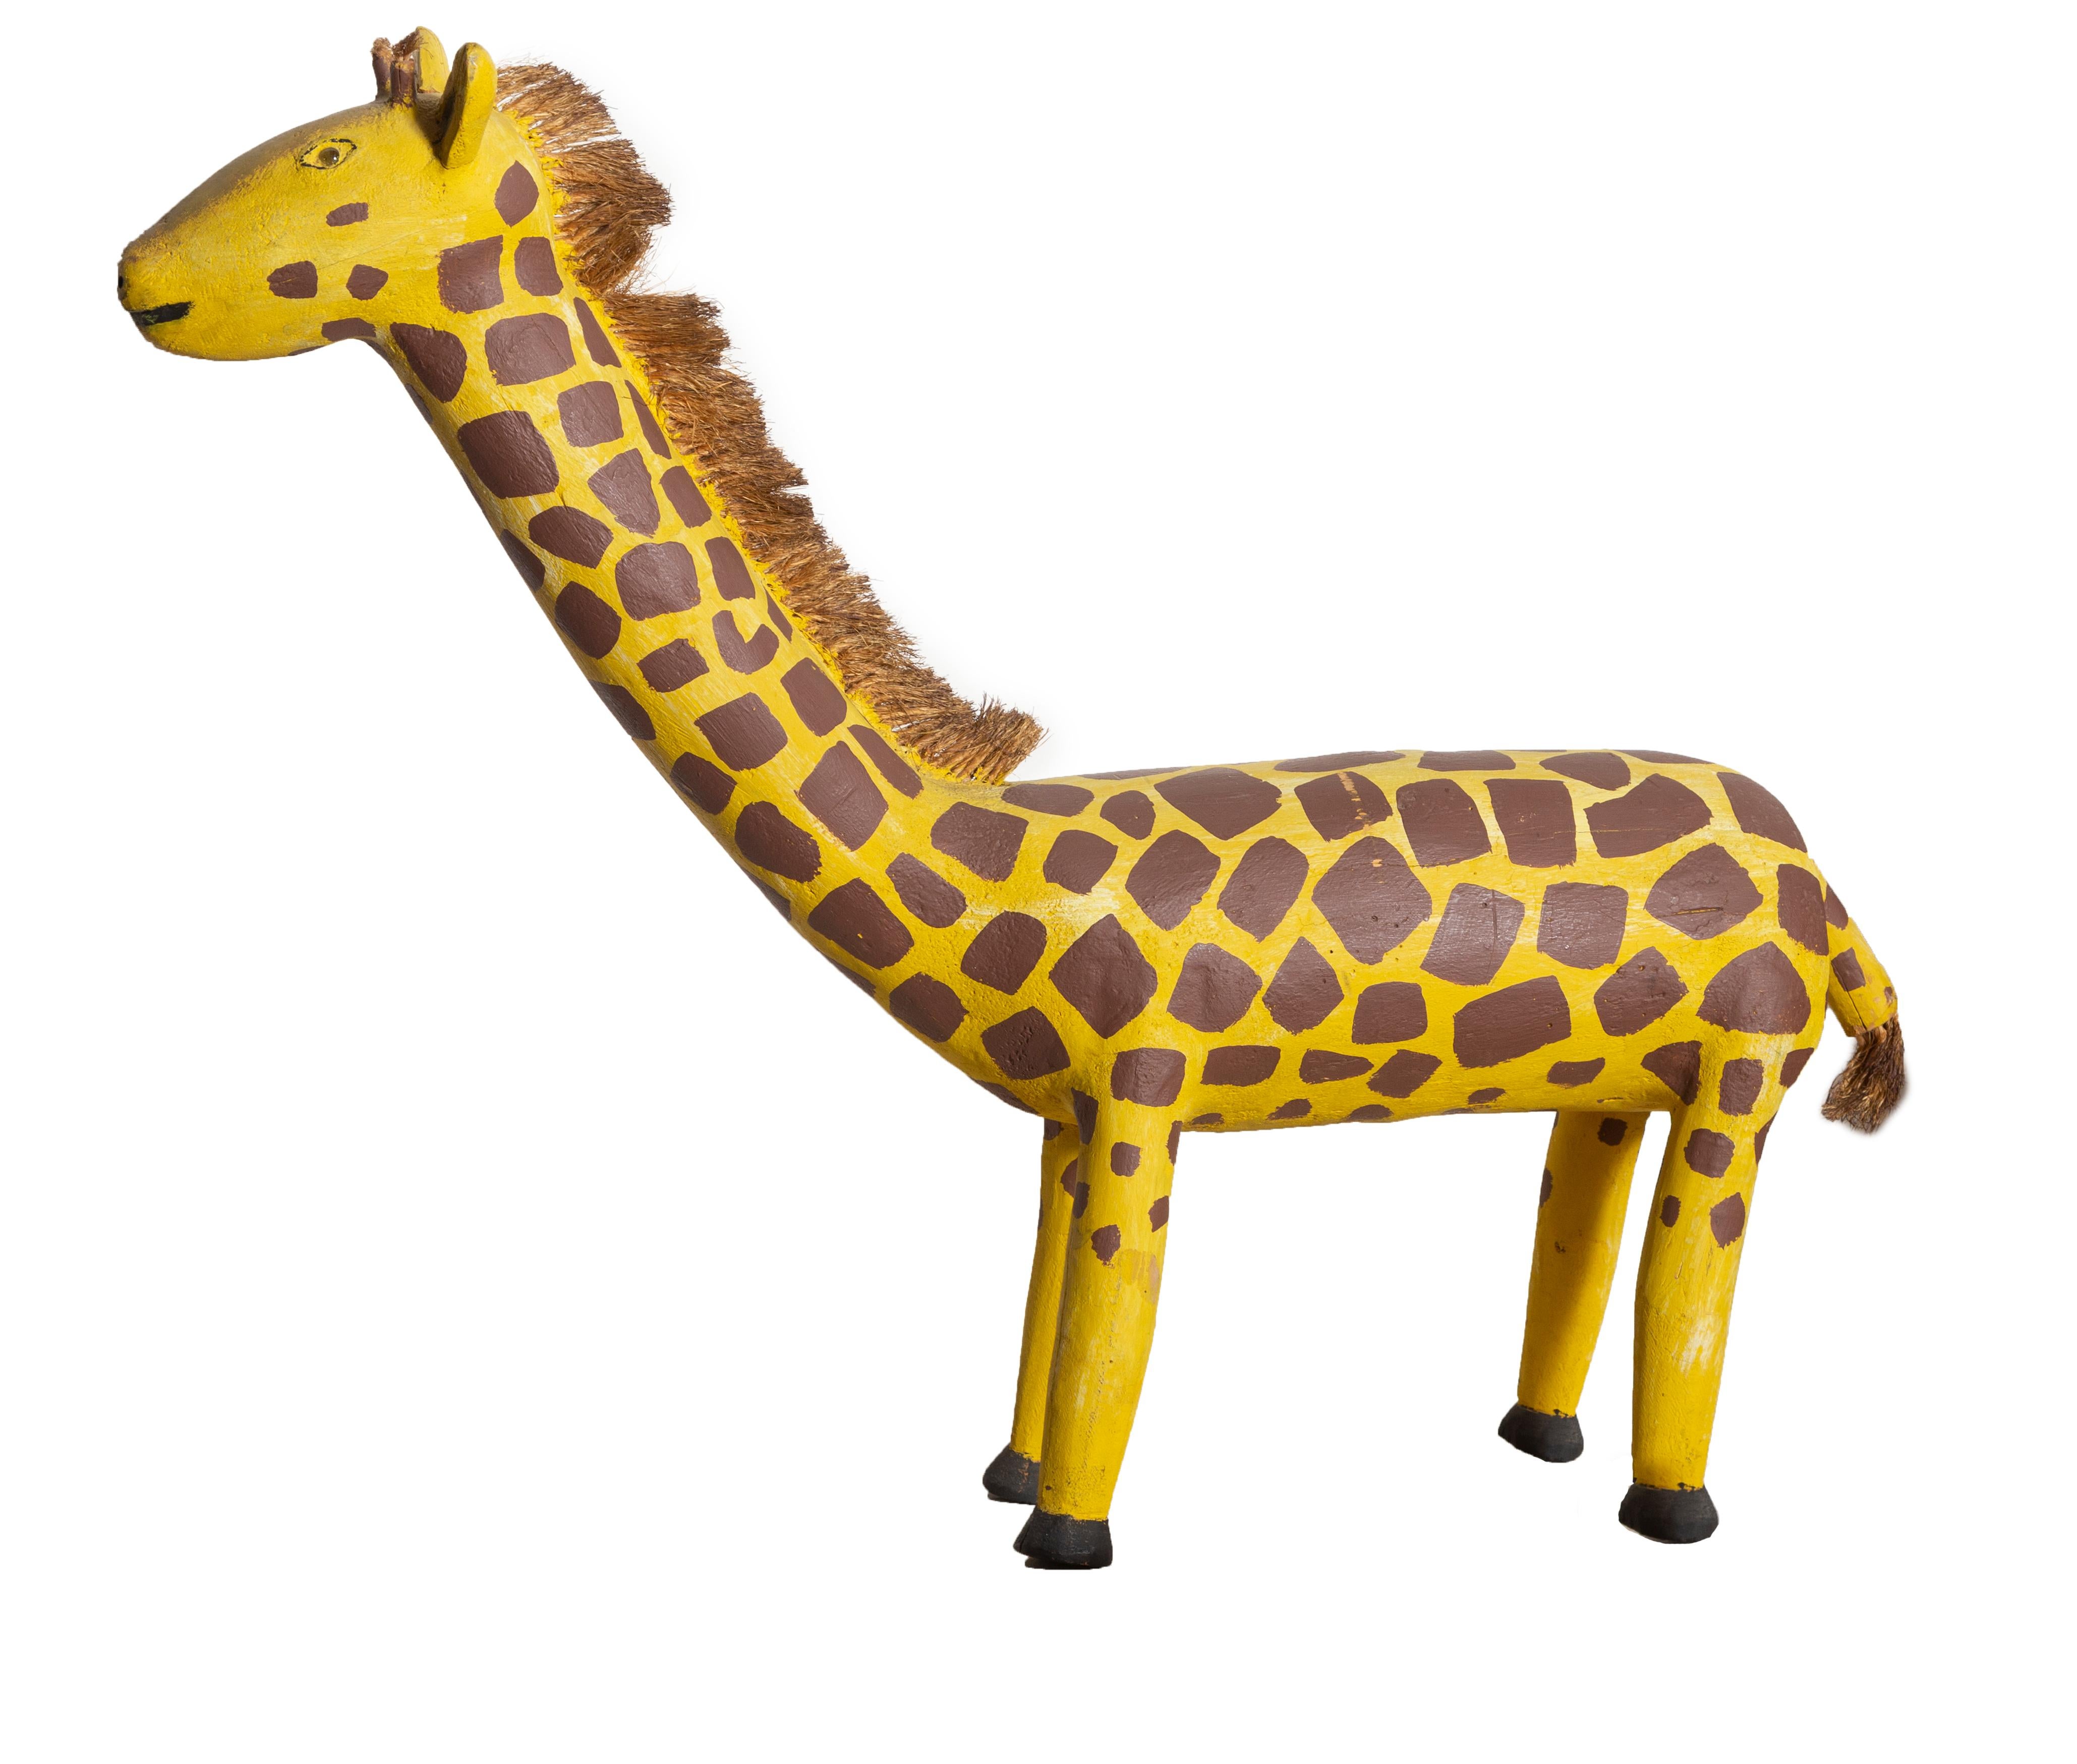 Giraffe, Hand-carved and Painted Wooden Sculpture by David Max Alvarez